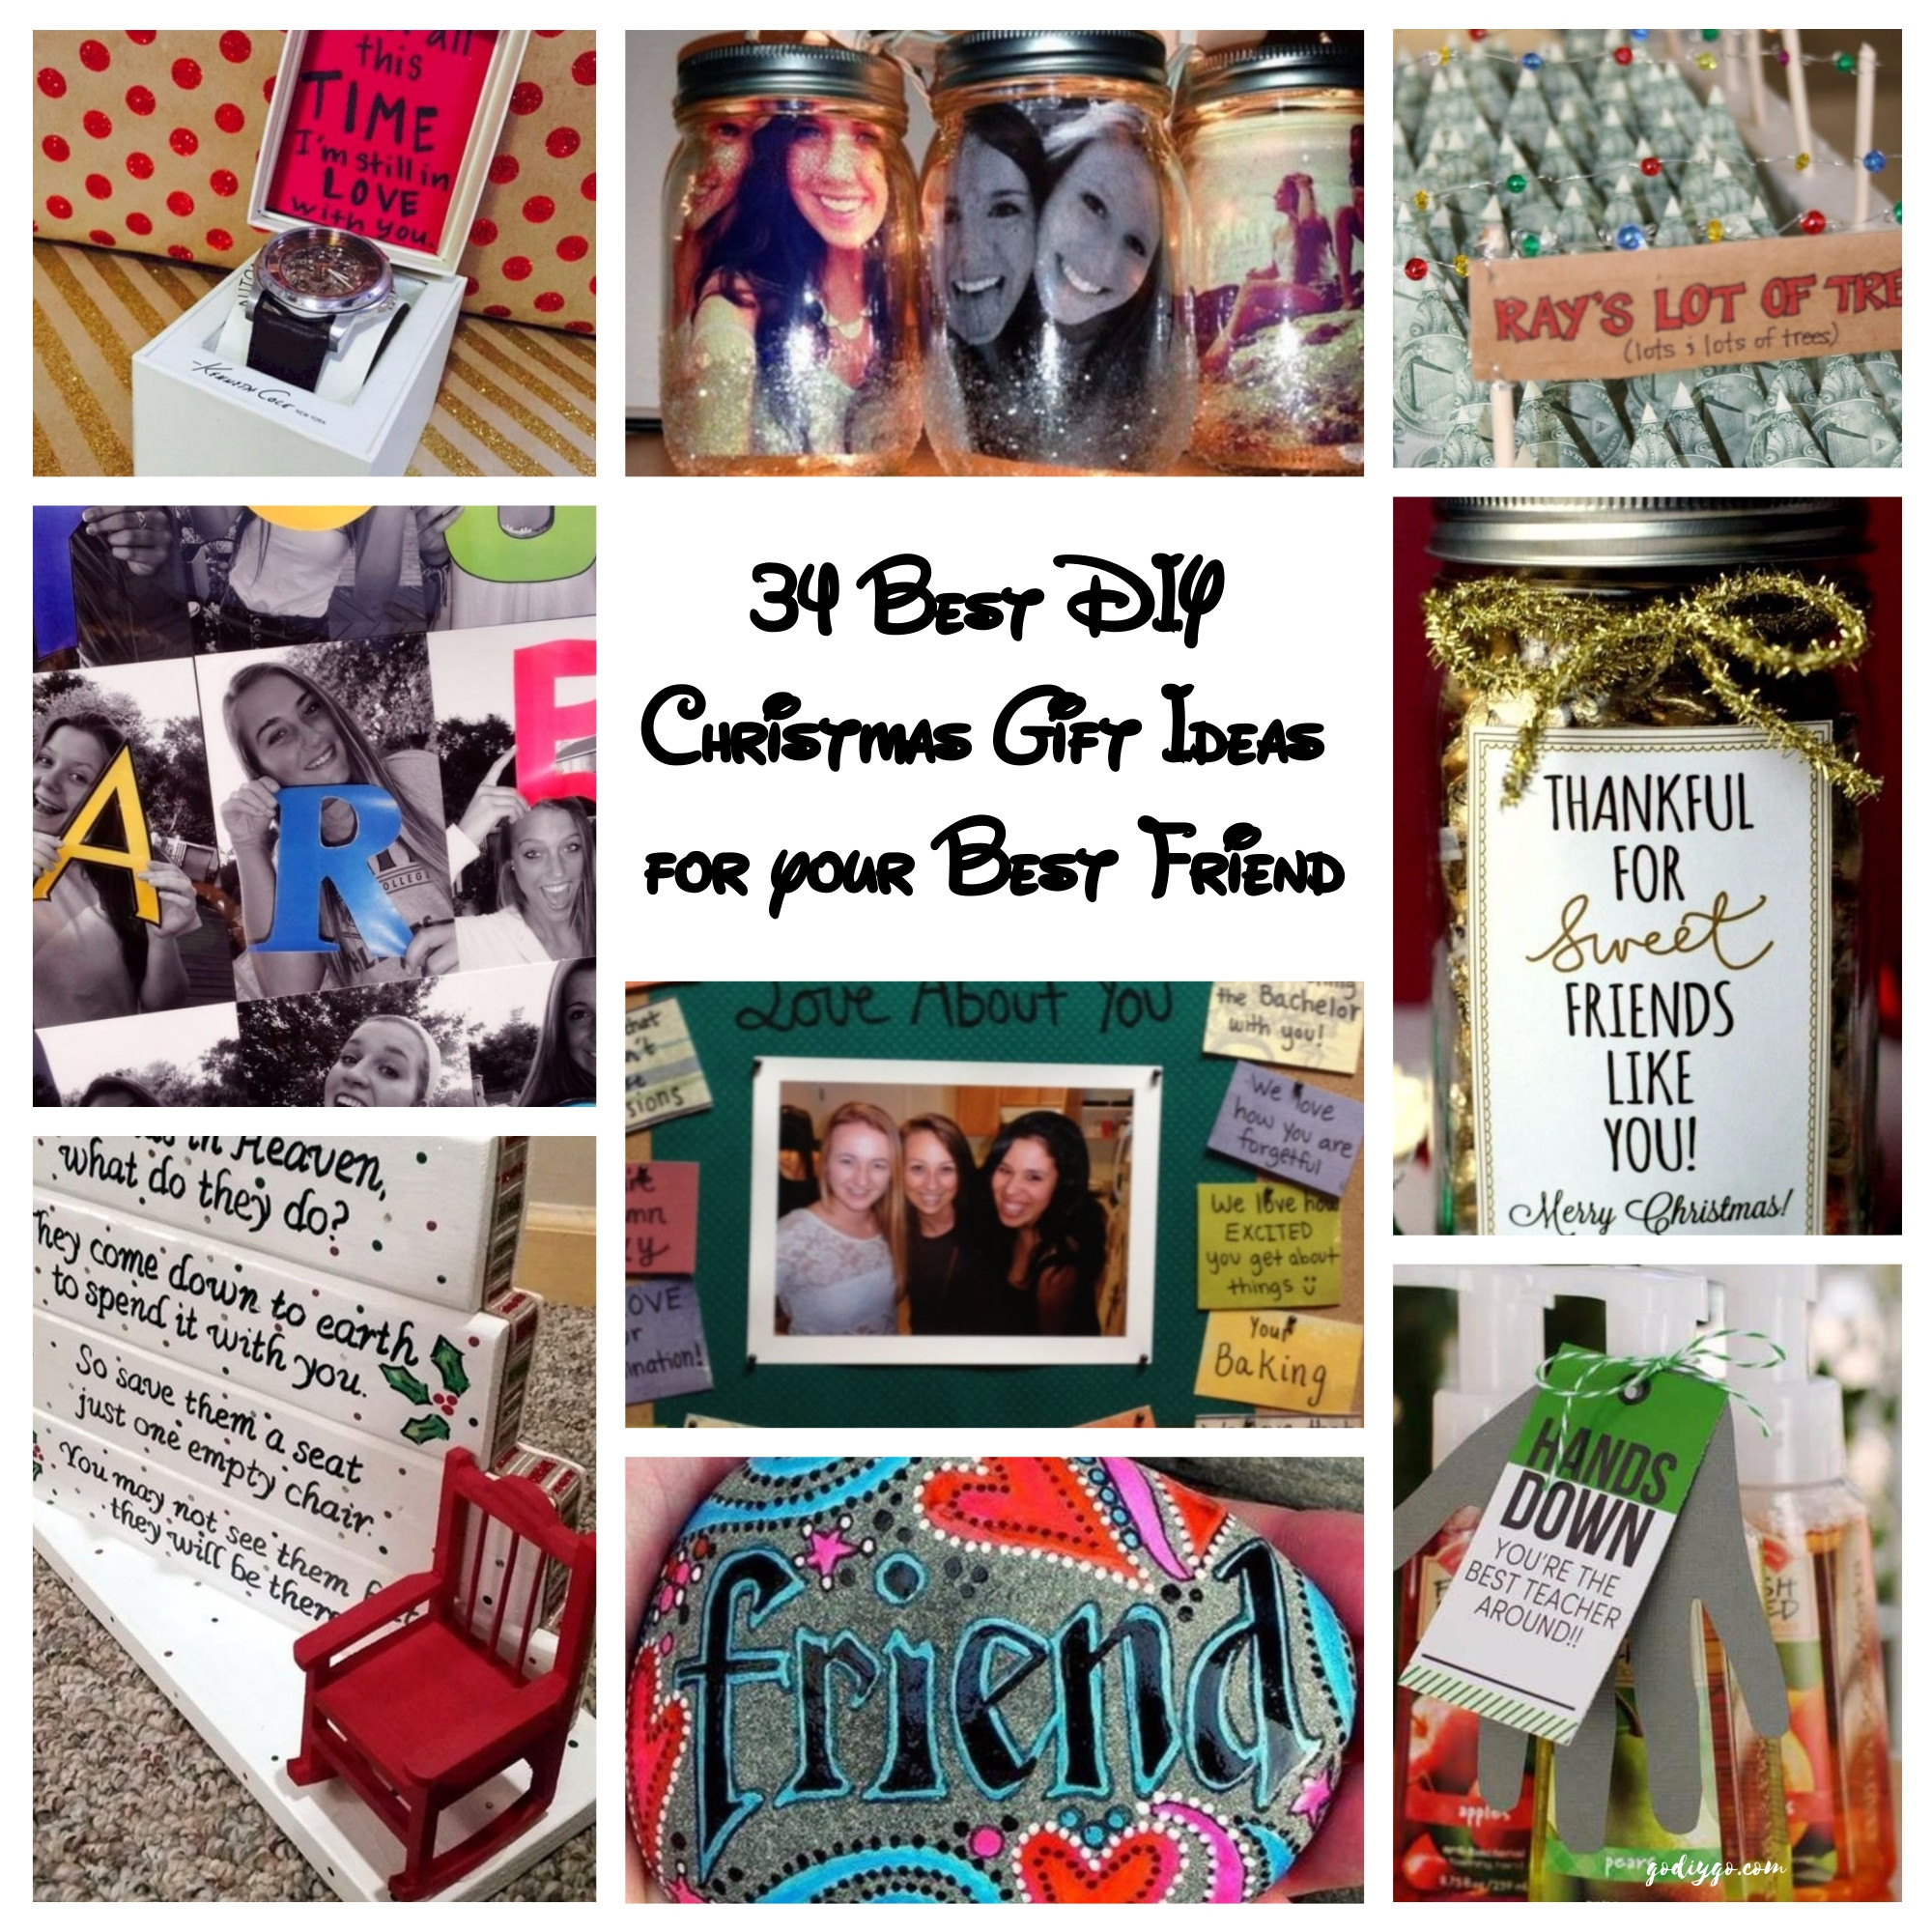 Holiday Gift Ideas For Your Best Friend
 34 Best DIY Christmas Gift Ideas for your Best Friend